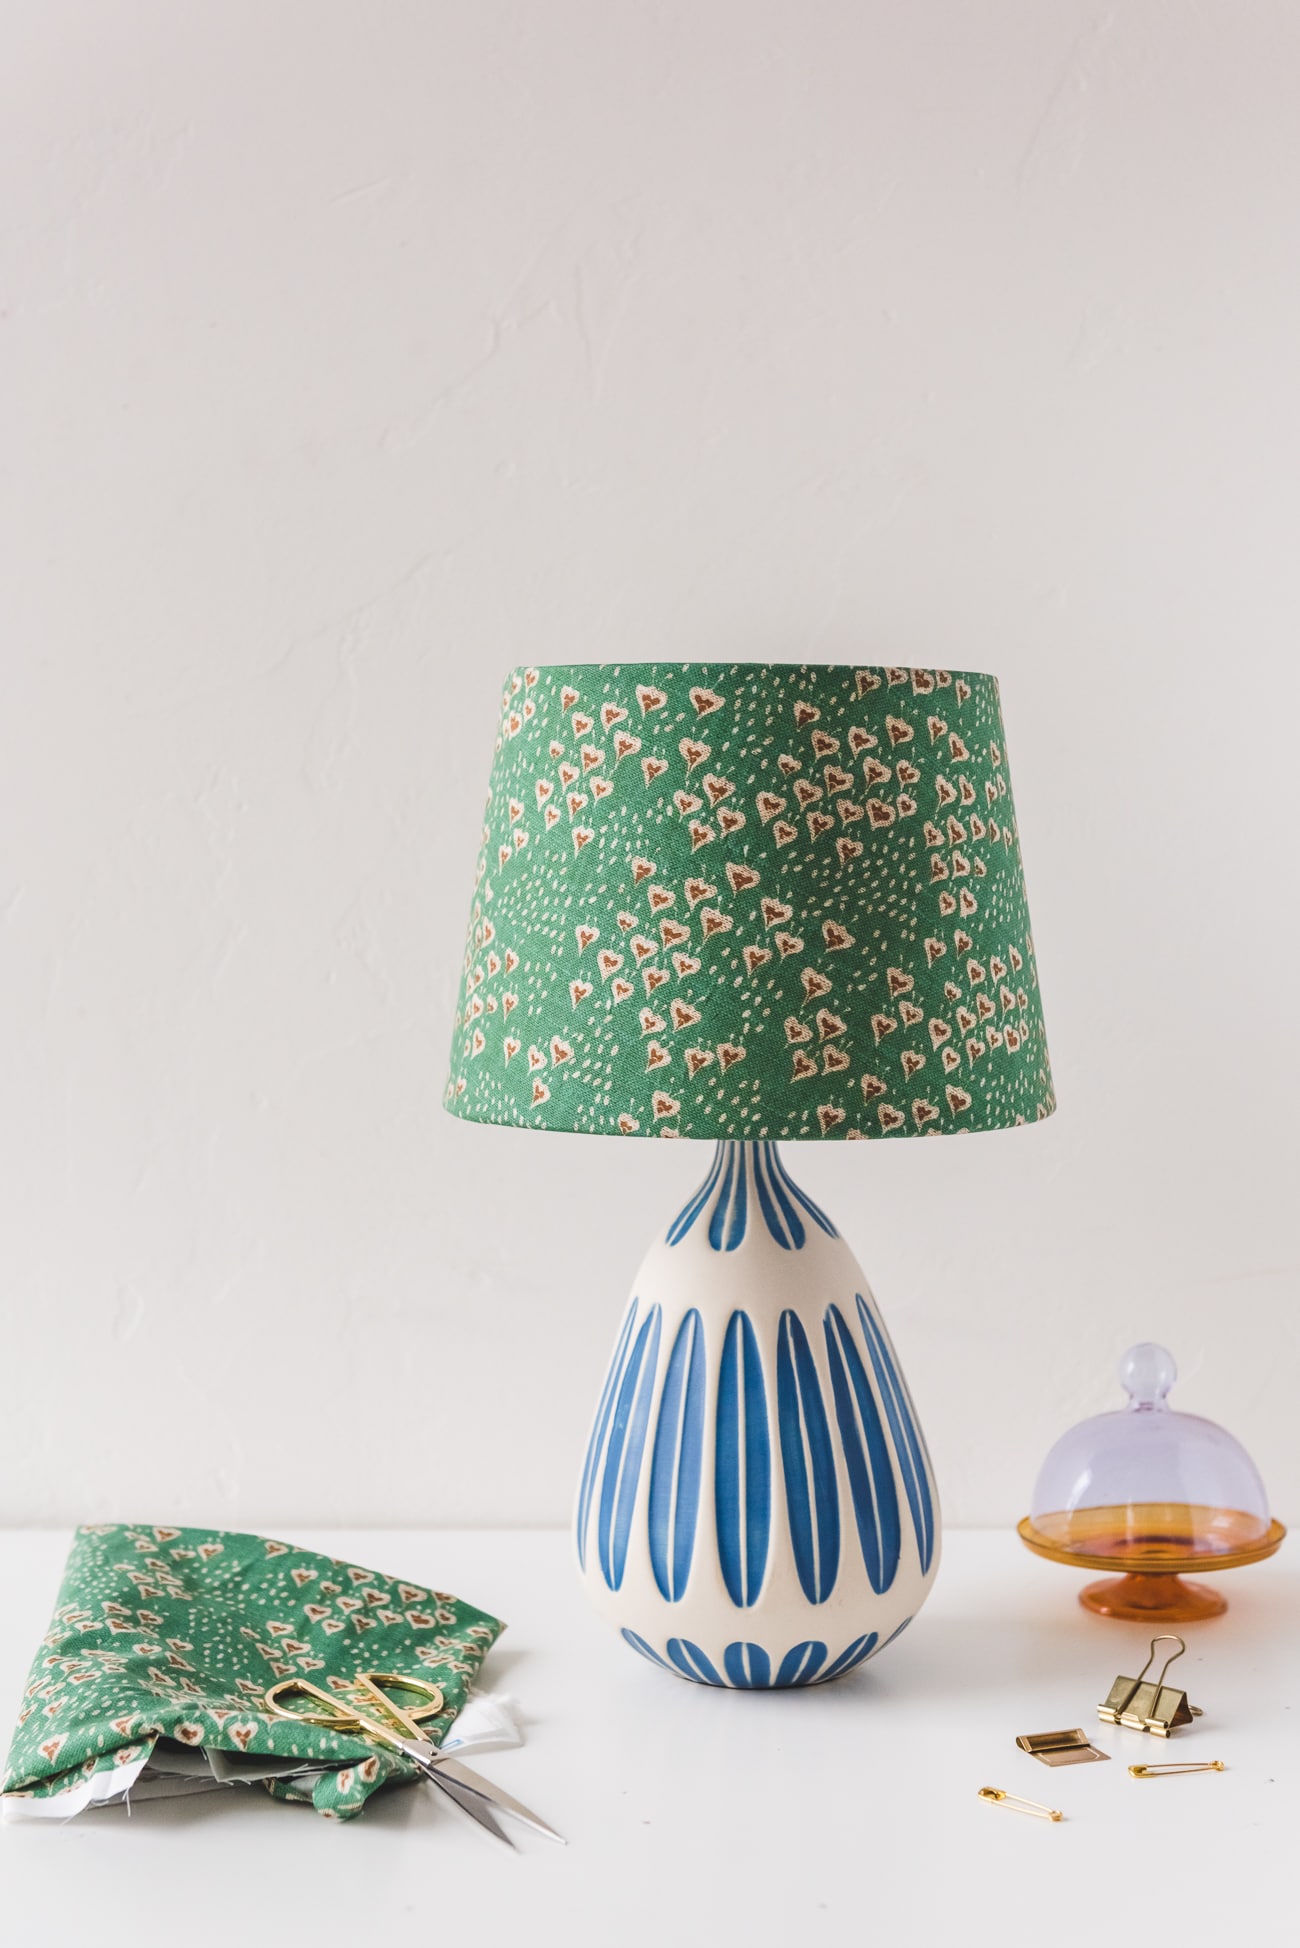 3 Diy Lampshades Made With Unexpected, How To Make A Lampshade From Recycled Materials